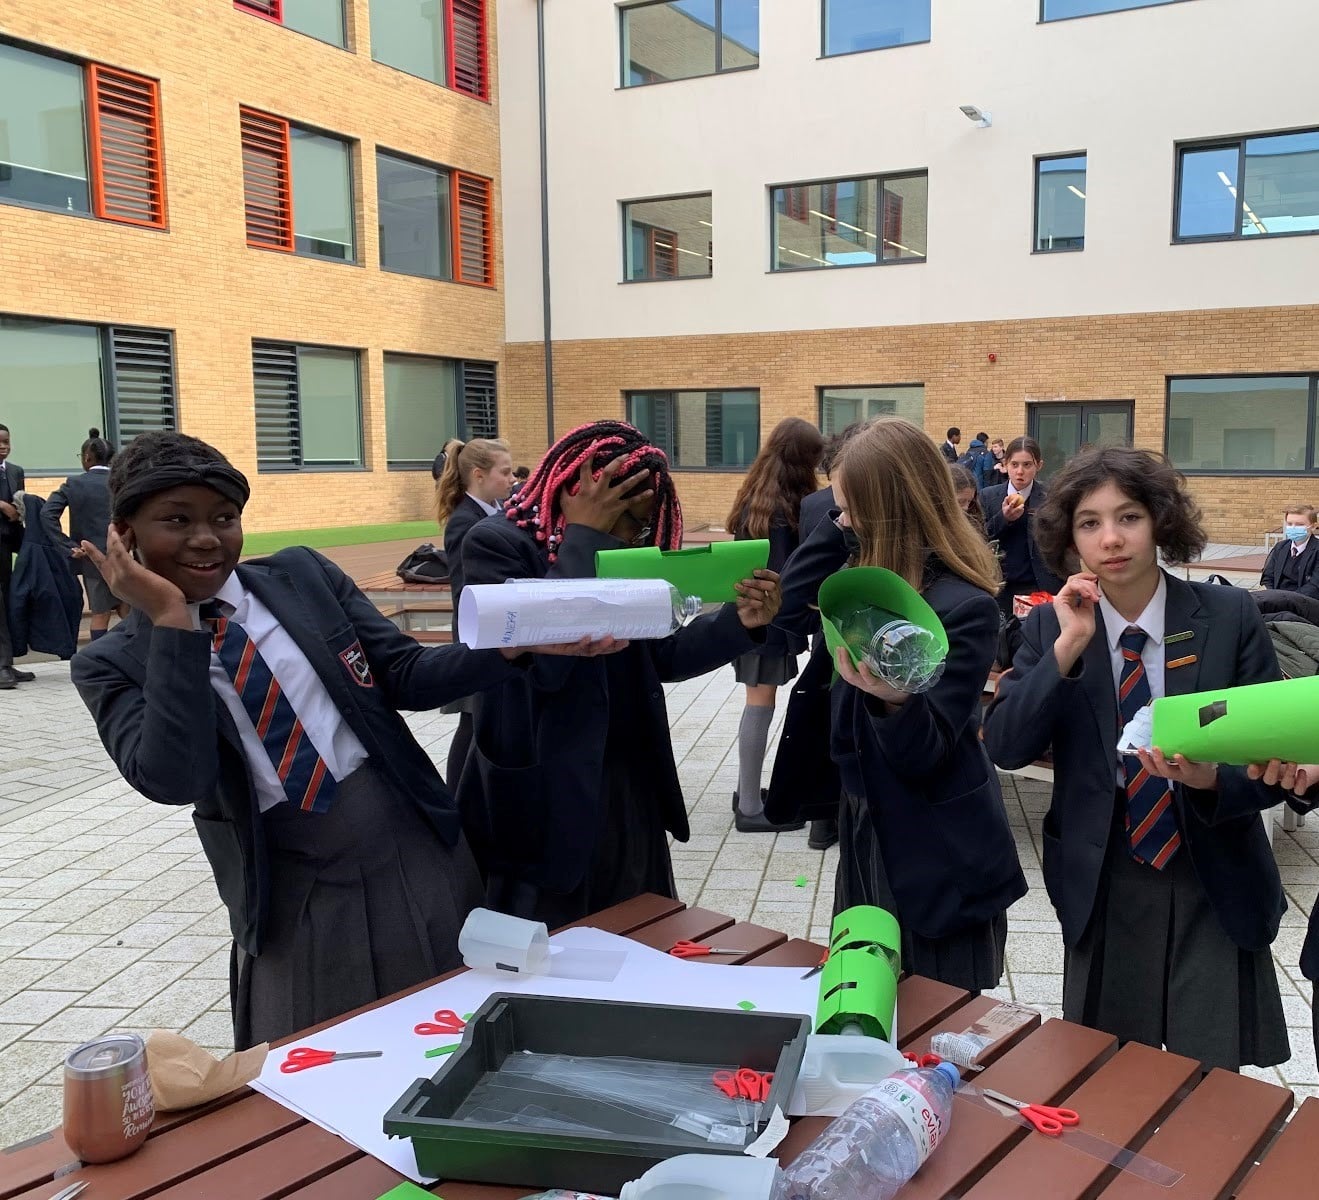 LAB students experiment with amplifying sound outdoors as part of their learning for British Science Week.